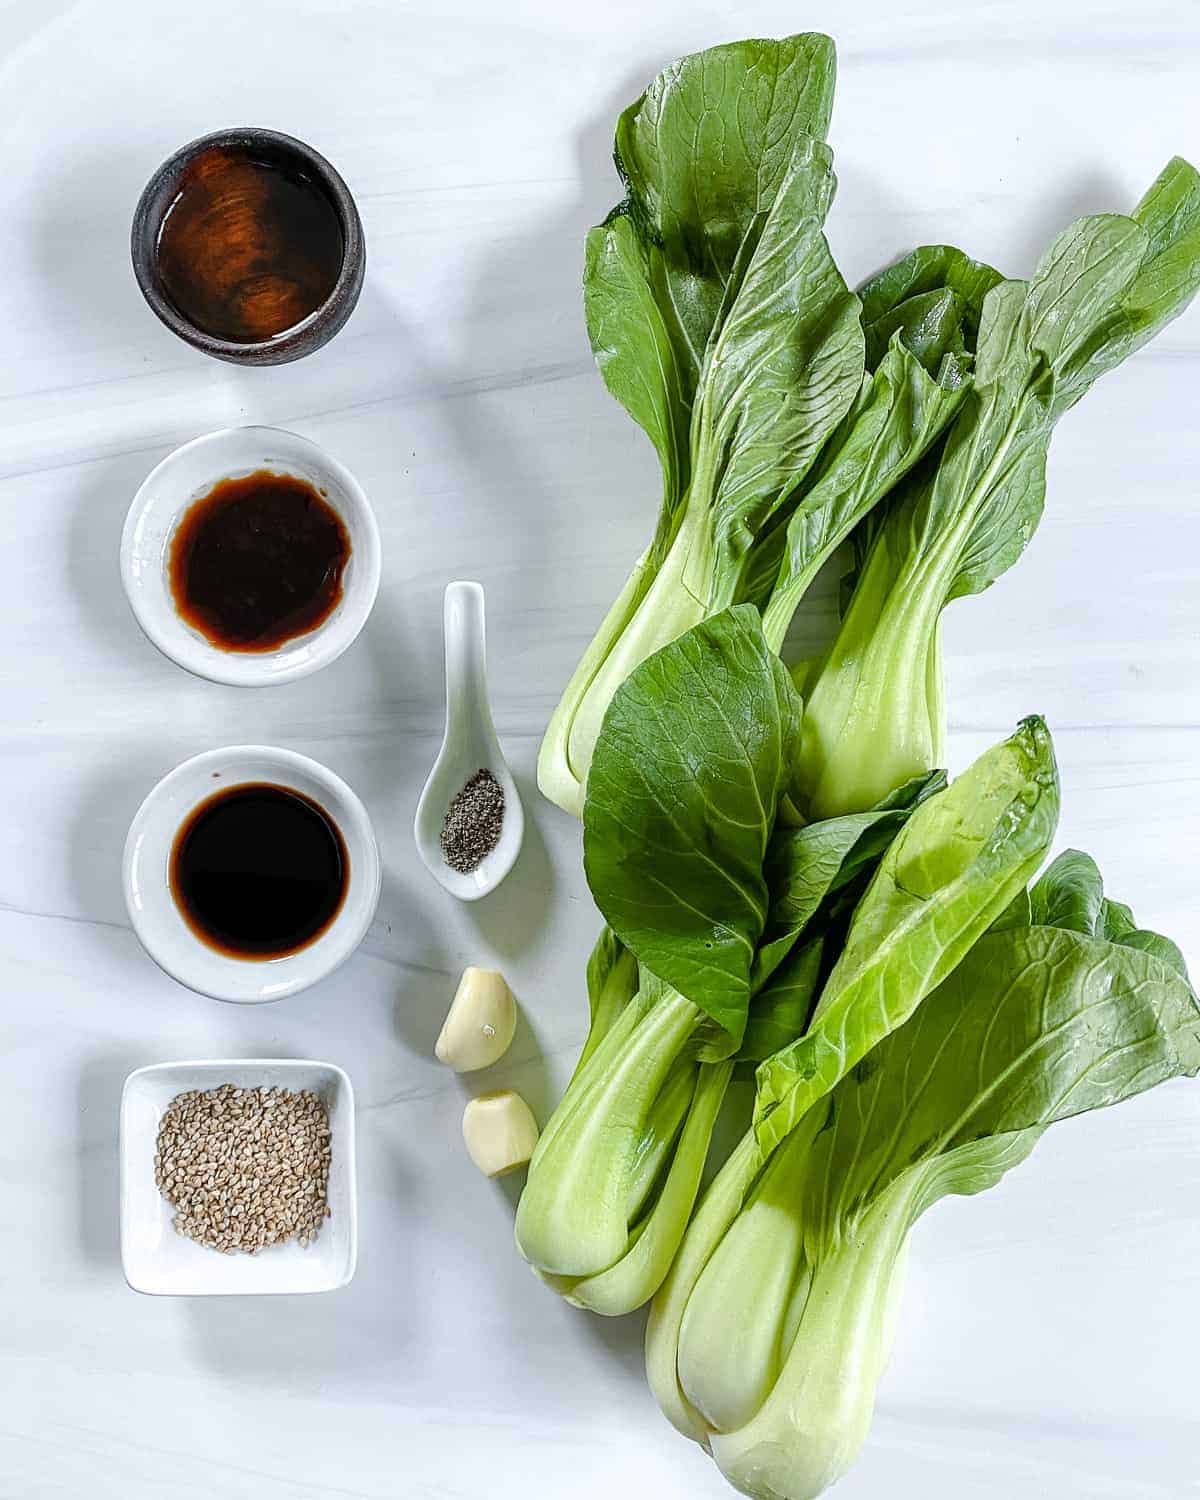 ingredients for Baby Bok Choy with Soy Sauce and Garlic measured out against a white surface